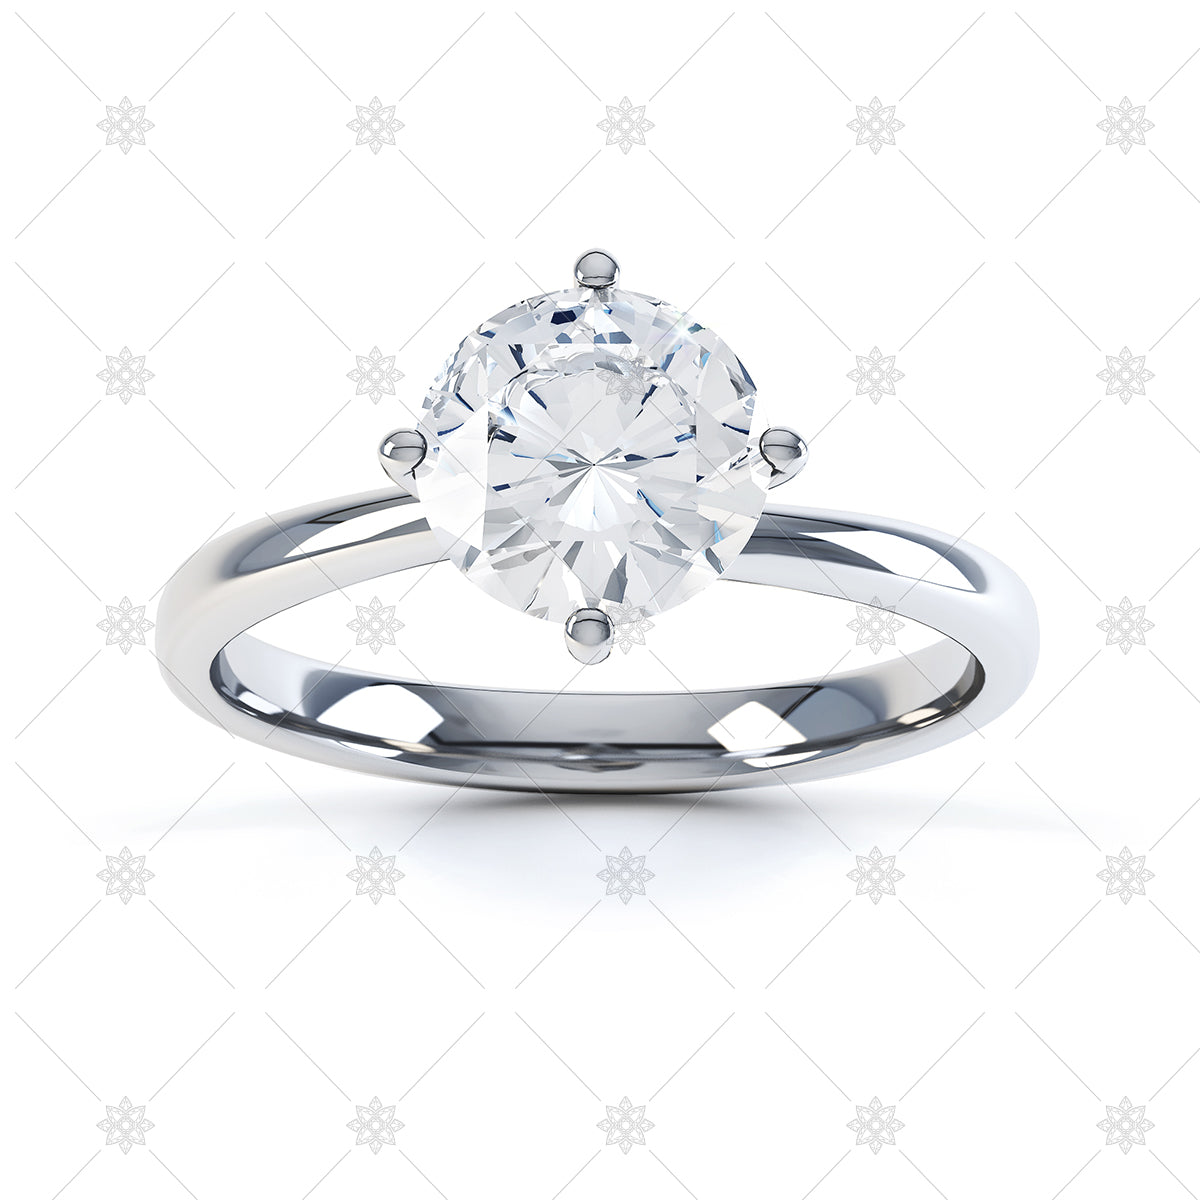 Cushion Cut Solitaire Diamond Engagement Ring, 4 Claw Set on a Round  Tapered Band with an Undersweep Setting.